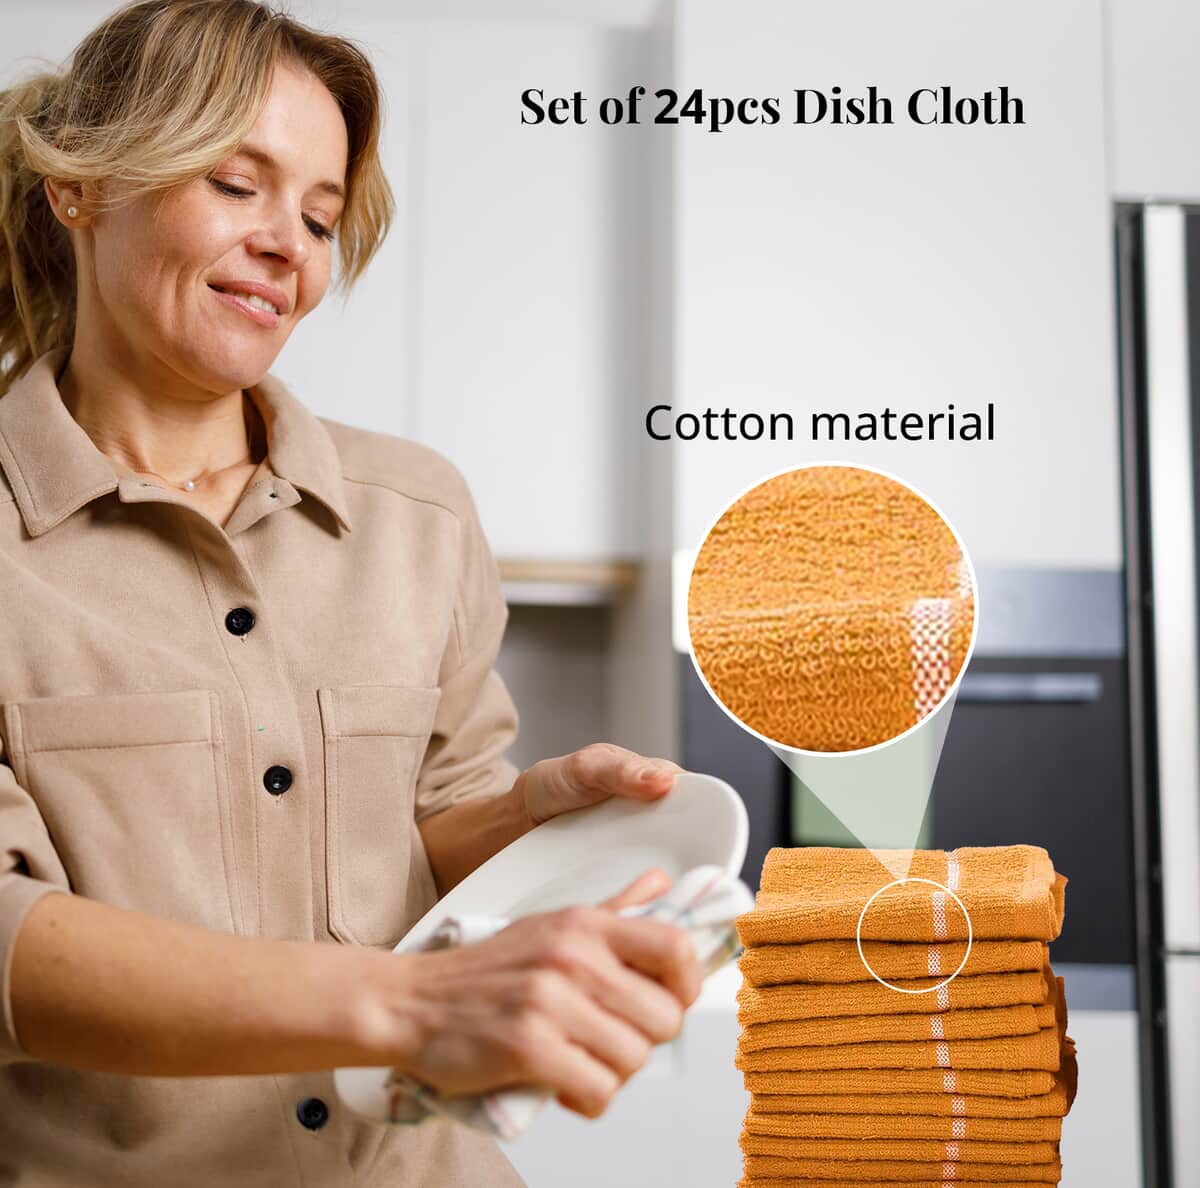 Set of 24pcs Cotton Dish Scrubbing Cleaning Cloth - Yellow image number 2